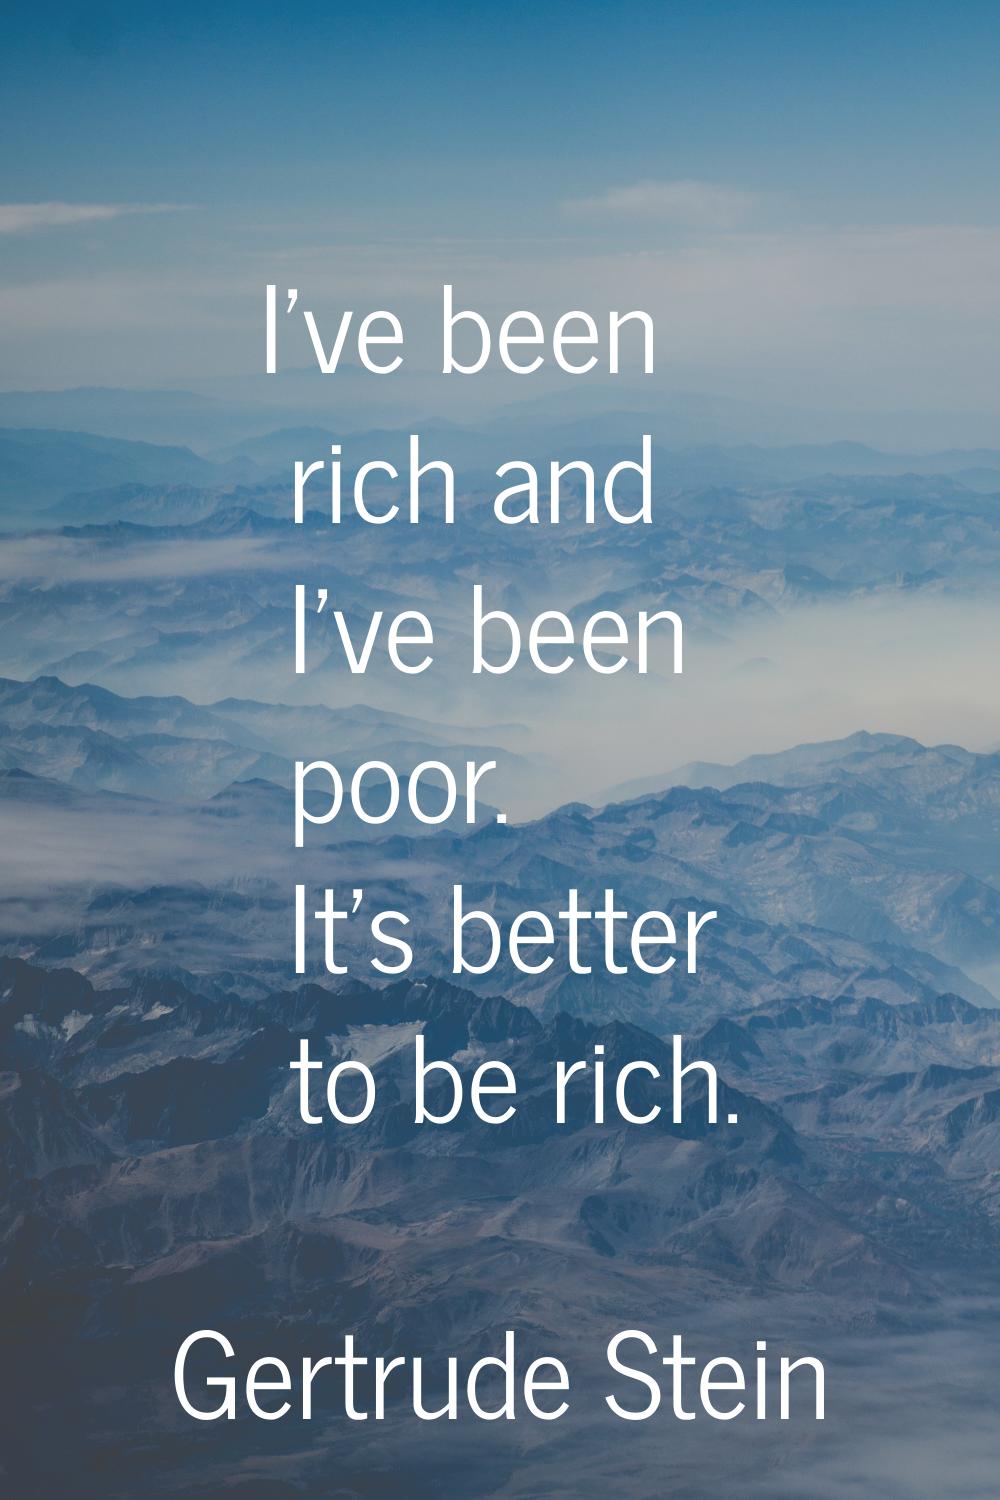 I've been rich and I've been poor. It's better to be rich.